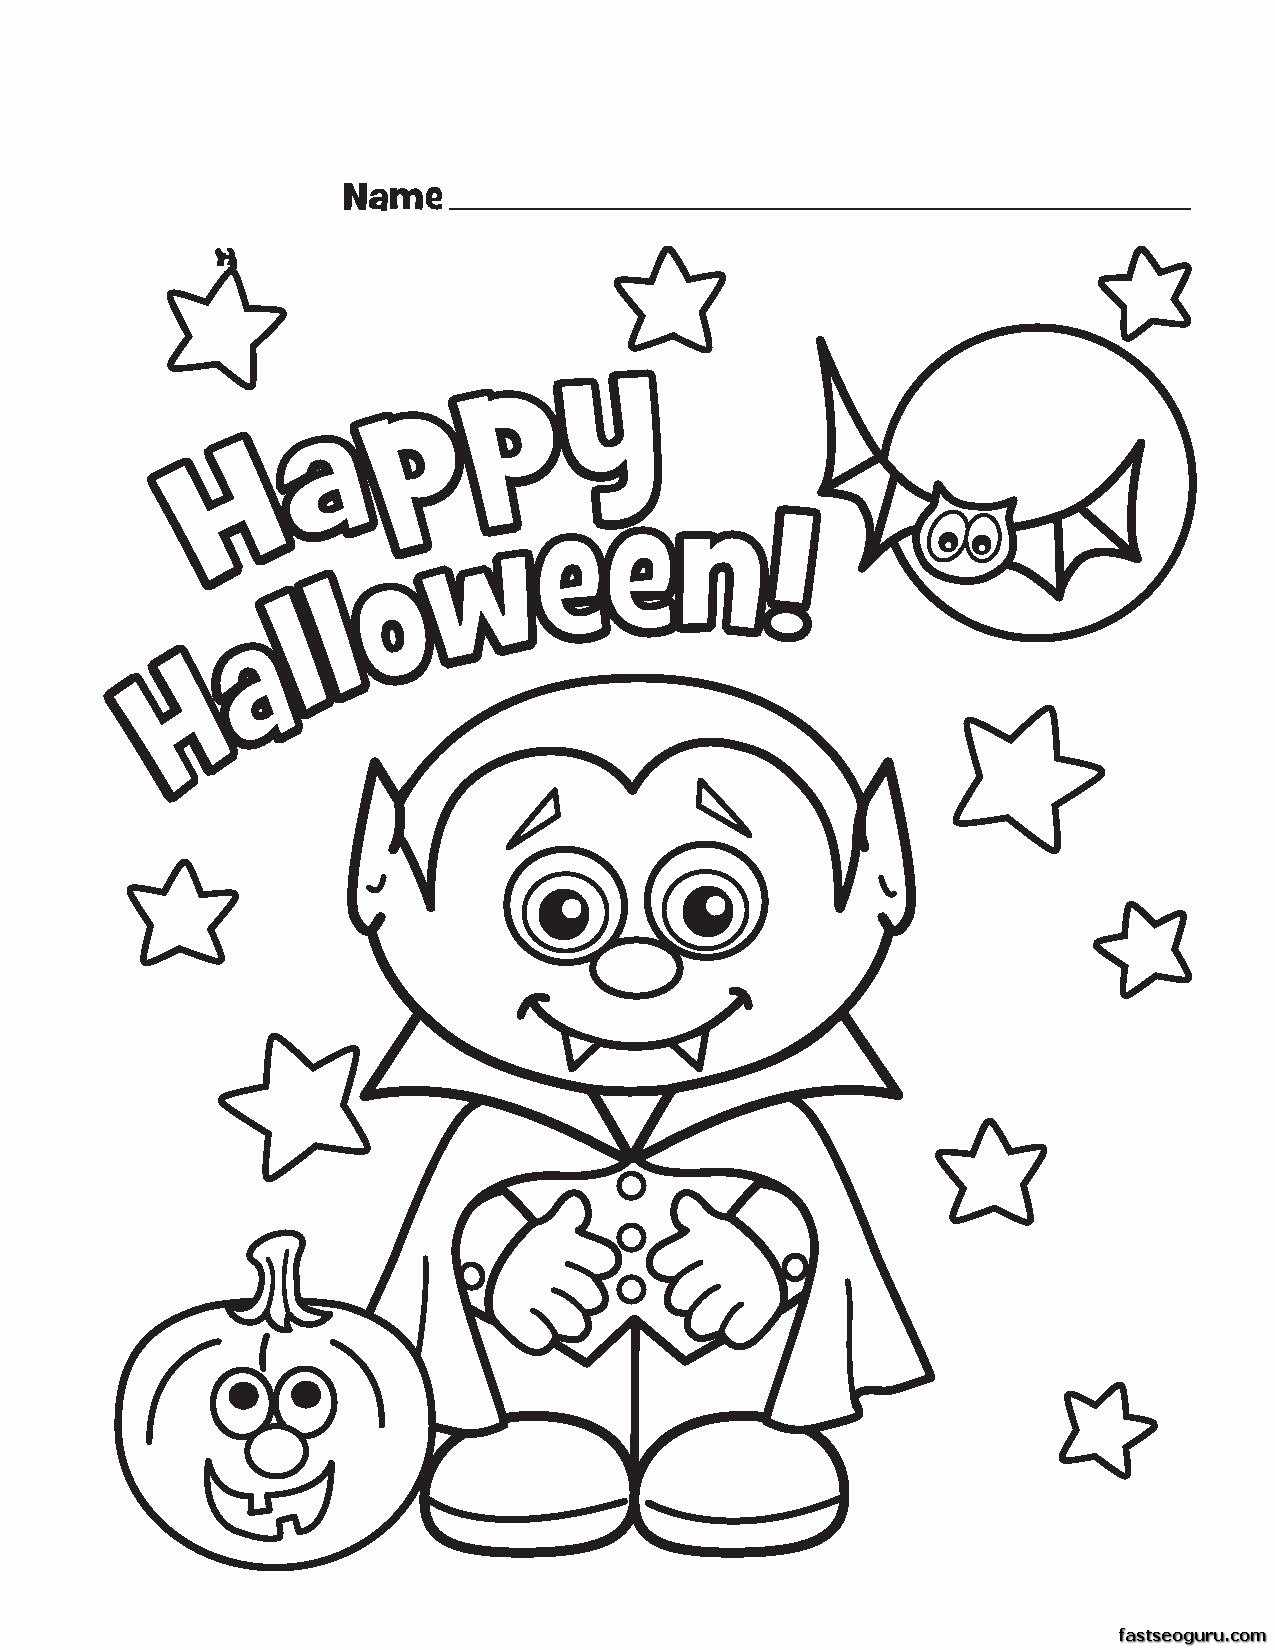 Halloween Worksheets Pdf Along with Coloring Halloween Picture Awesome Halloween Preschool Printables